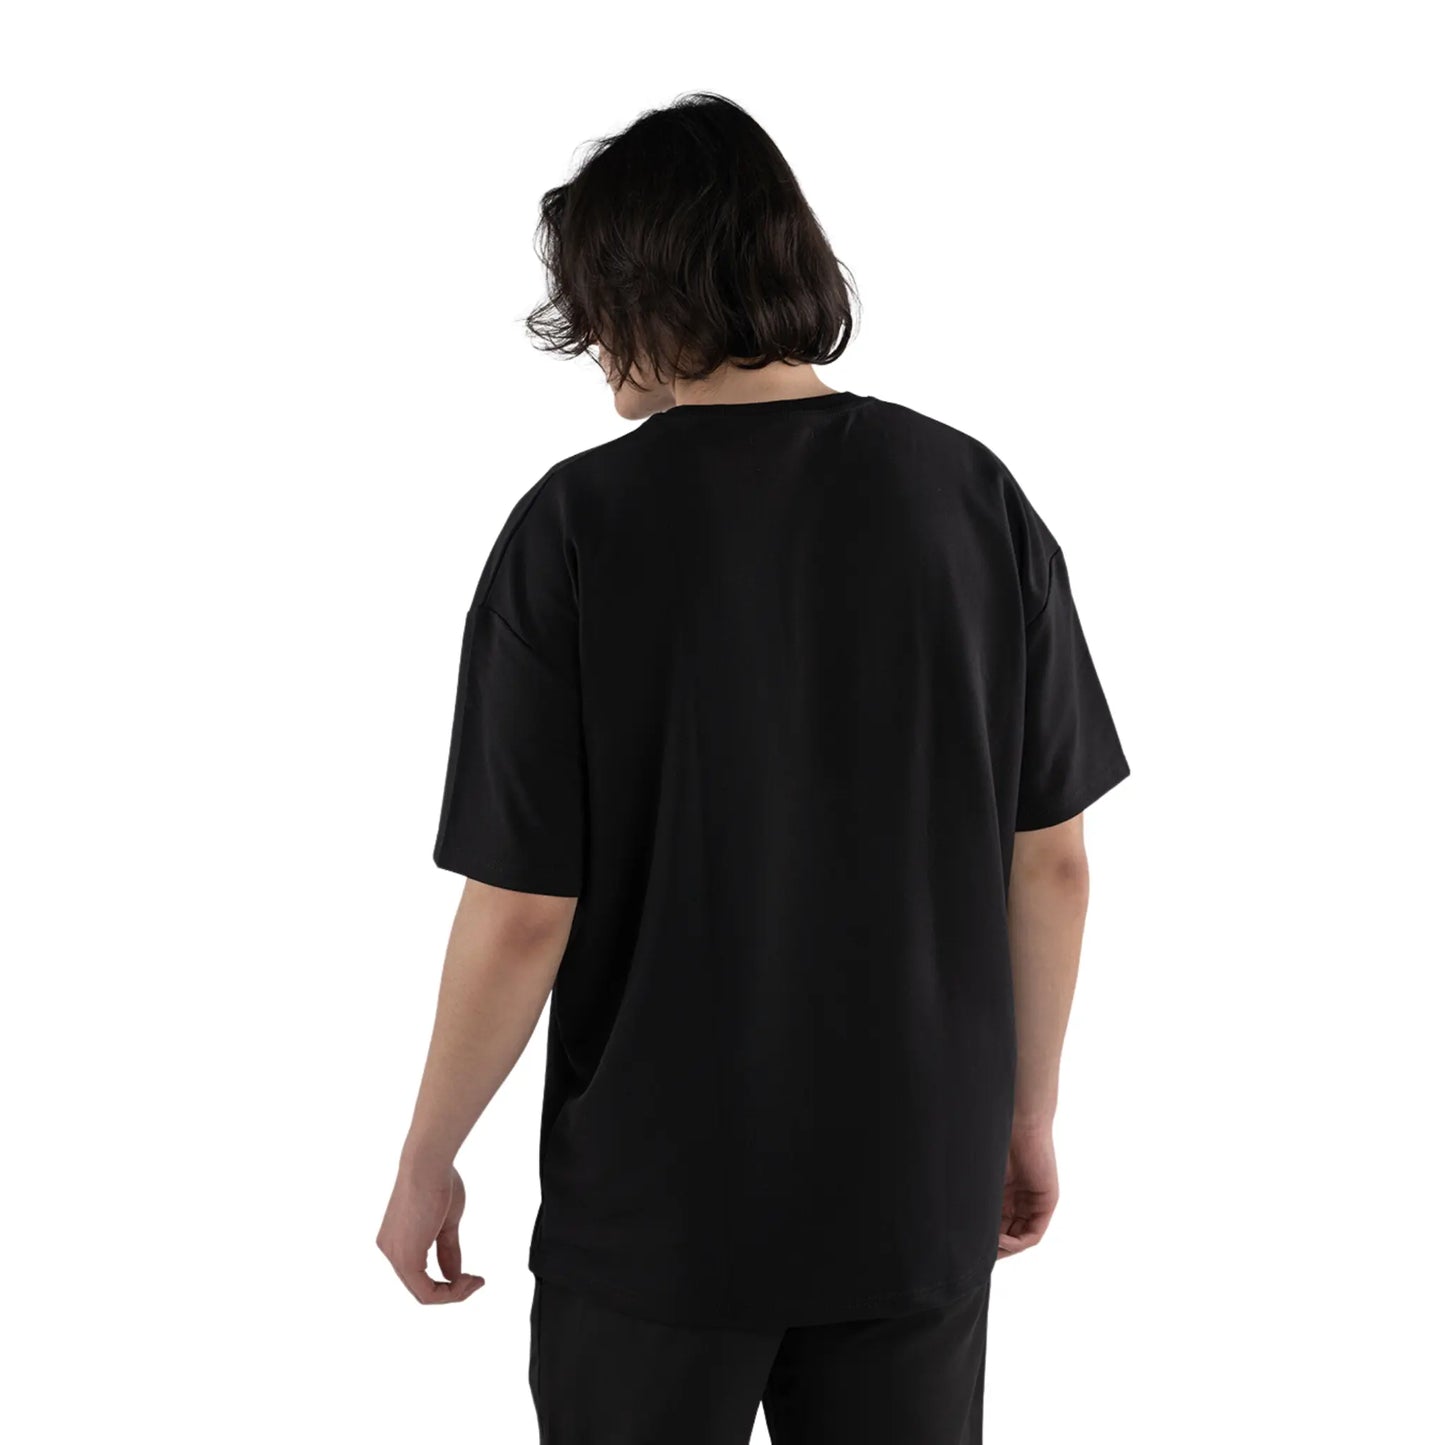 LES MALADROITS Oversized T-Shirt Black with Grey Painted Smiley and Graffiti back view